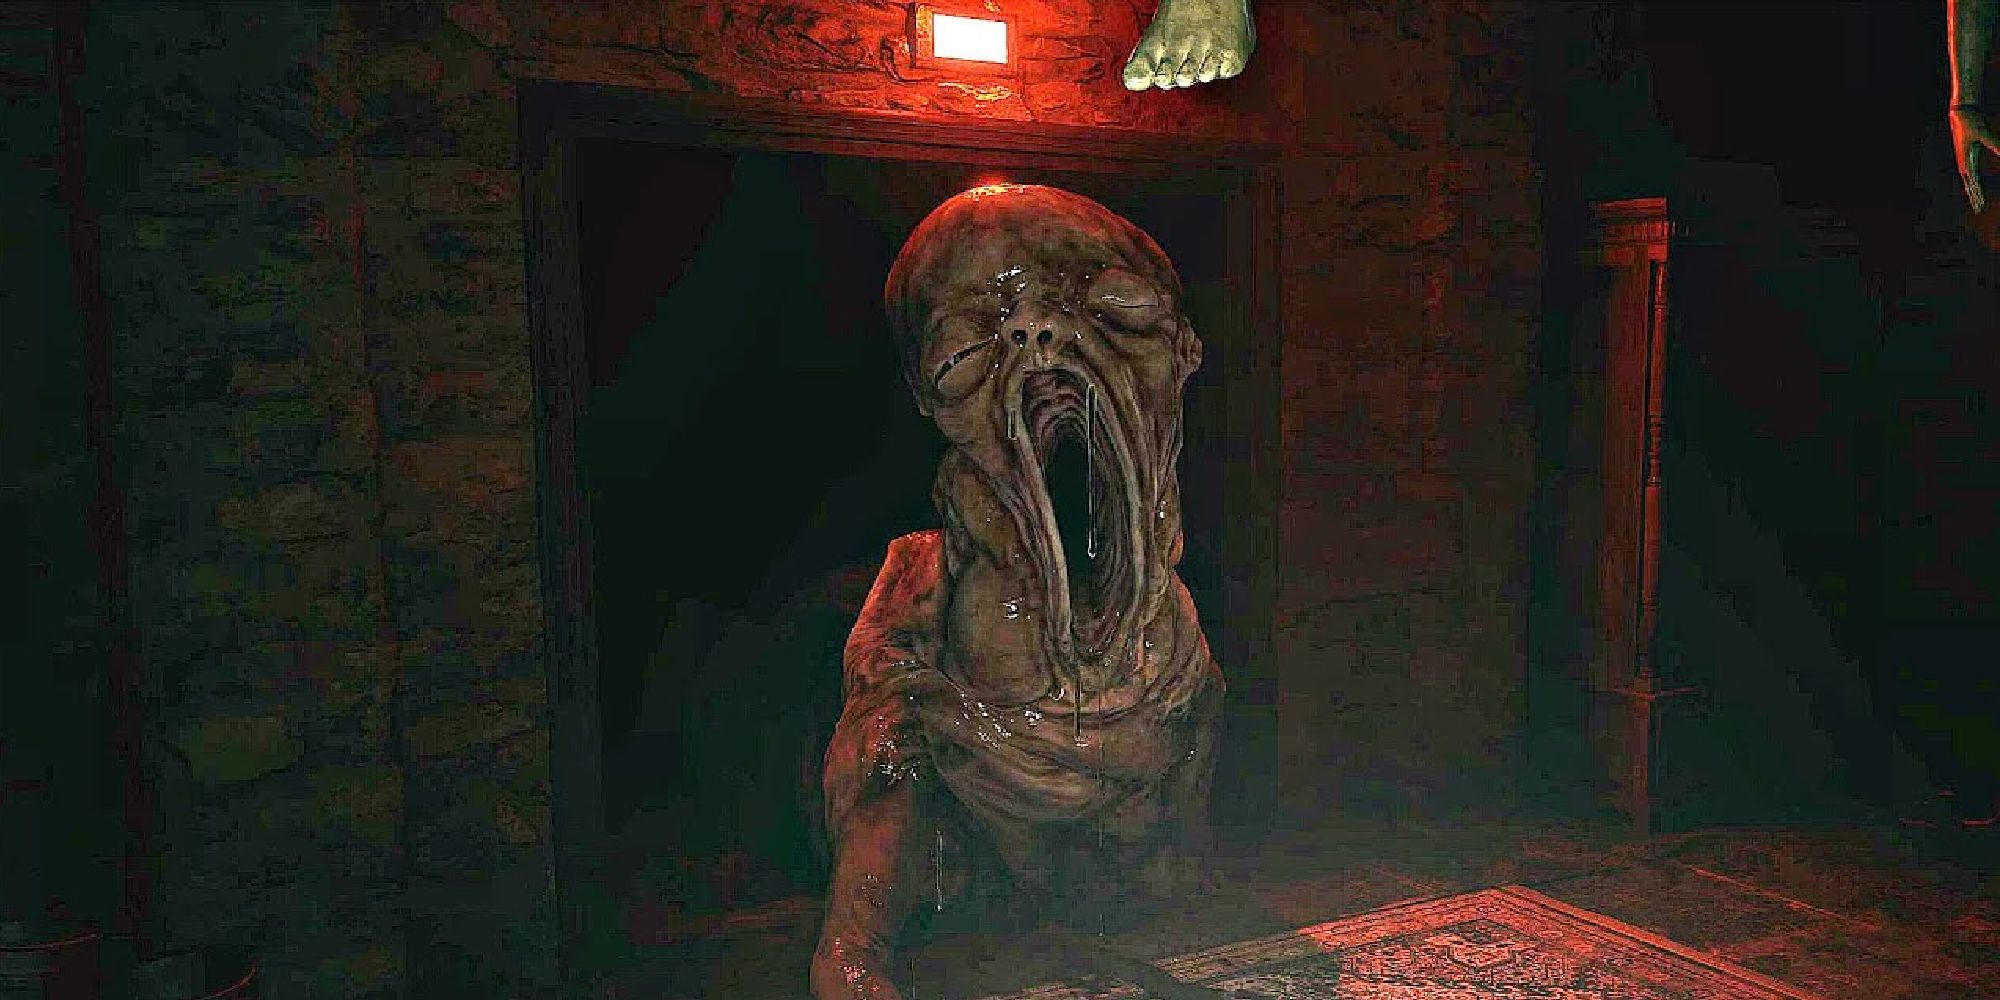 The horrifying baby monster from Resident Evil 8, crawling through a red-lit room towards the player.